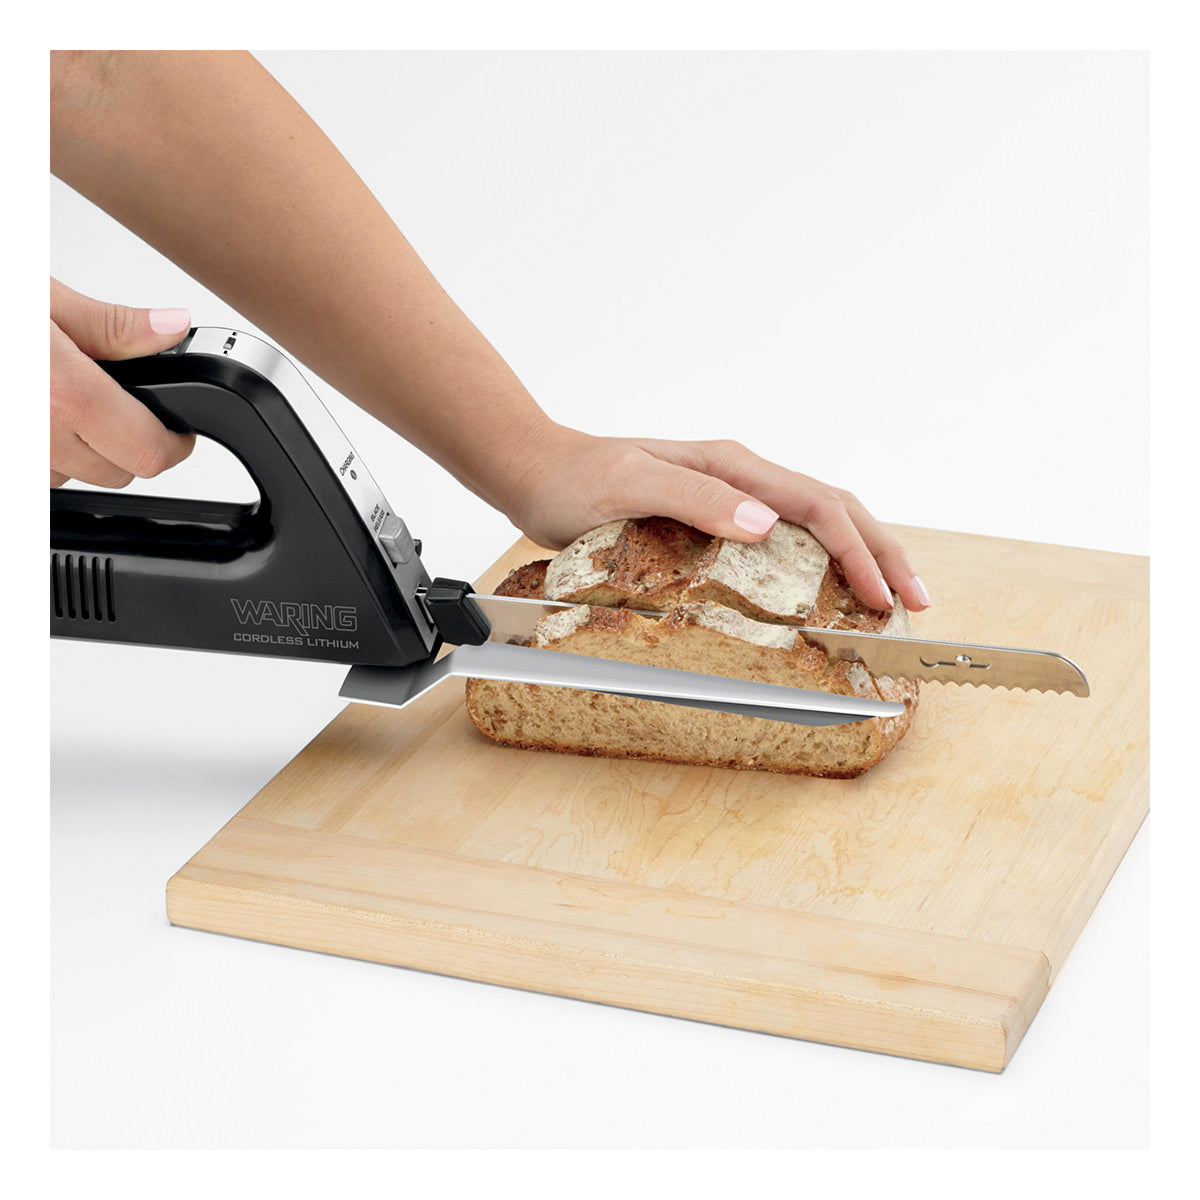 WEK200 Wireless Rechargeable Lithium Electric Knife with Bread & Carving Blades by Waring Commercial